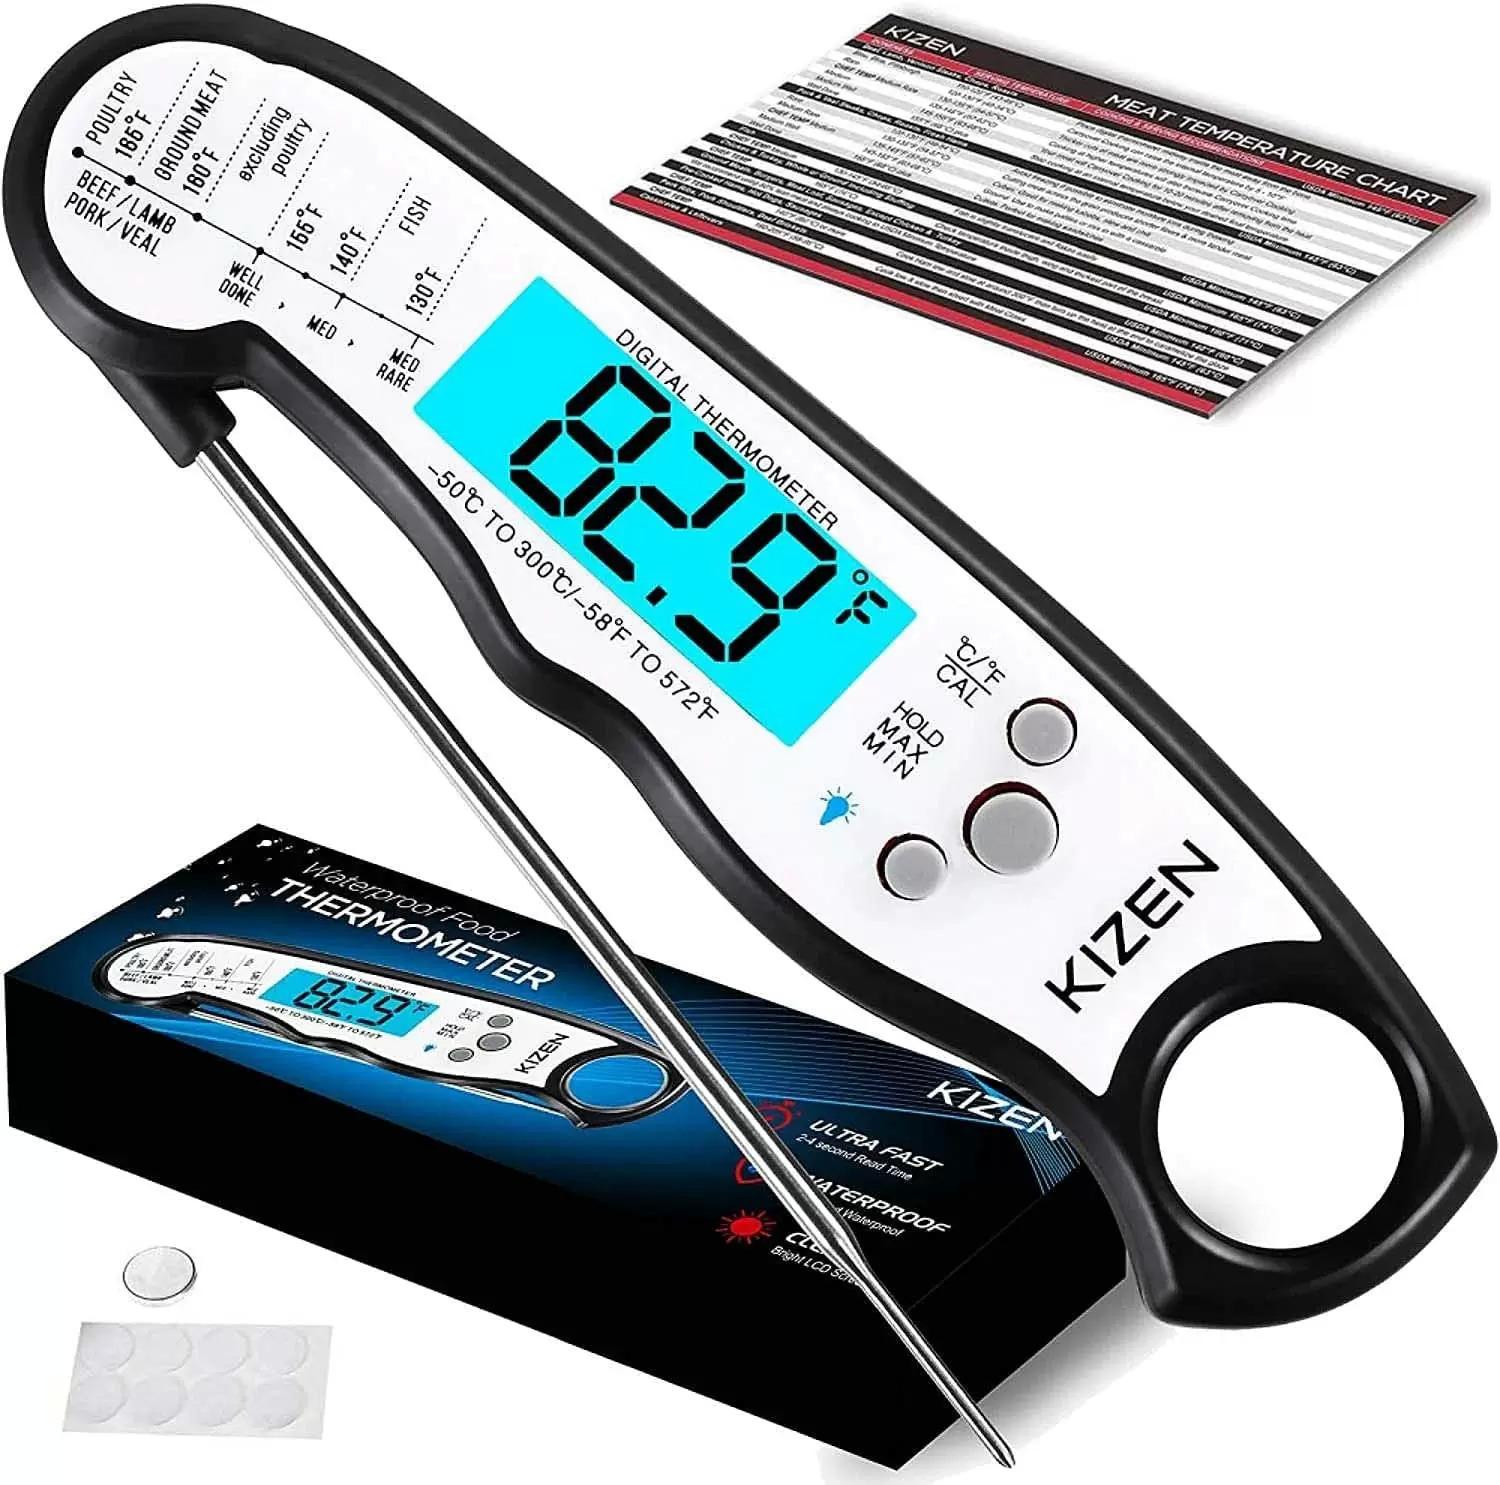 Kizen Digital Meat Thermometers for Cooking for $13.59